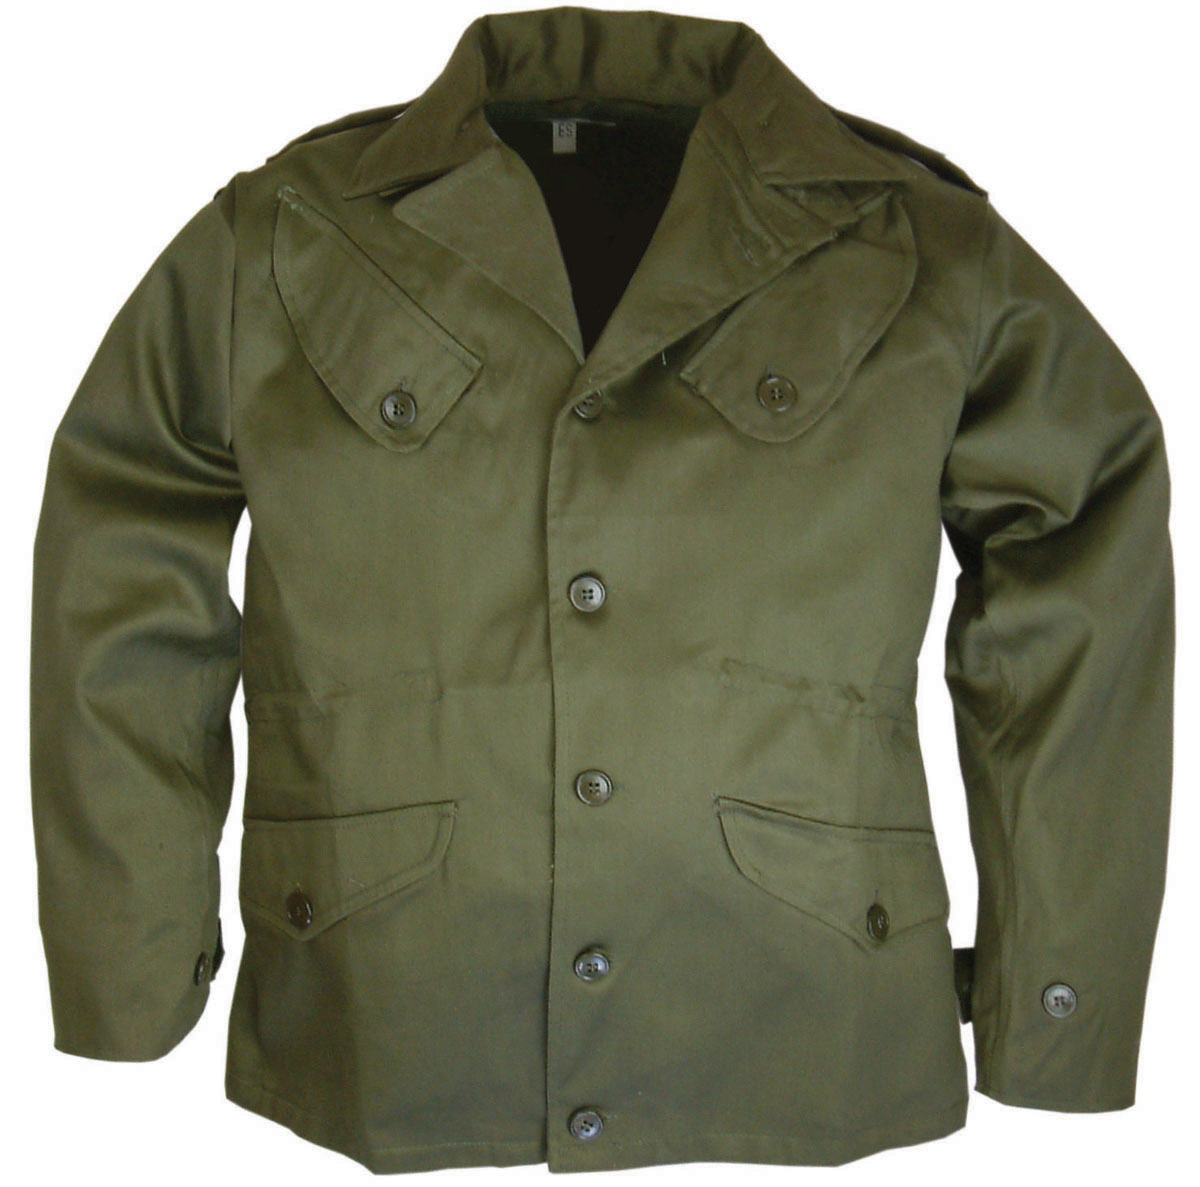 US M51 Field Jacket by US Army